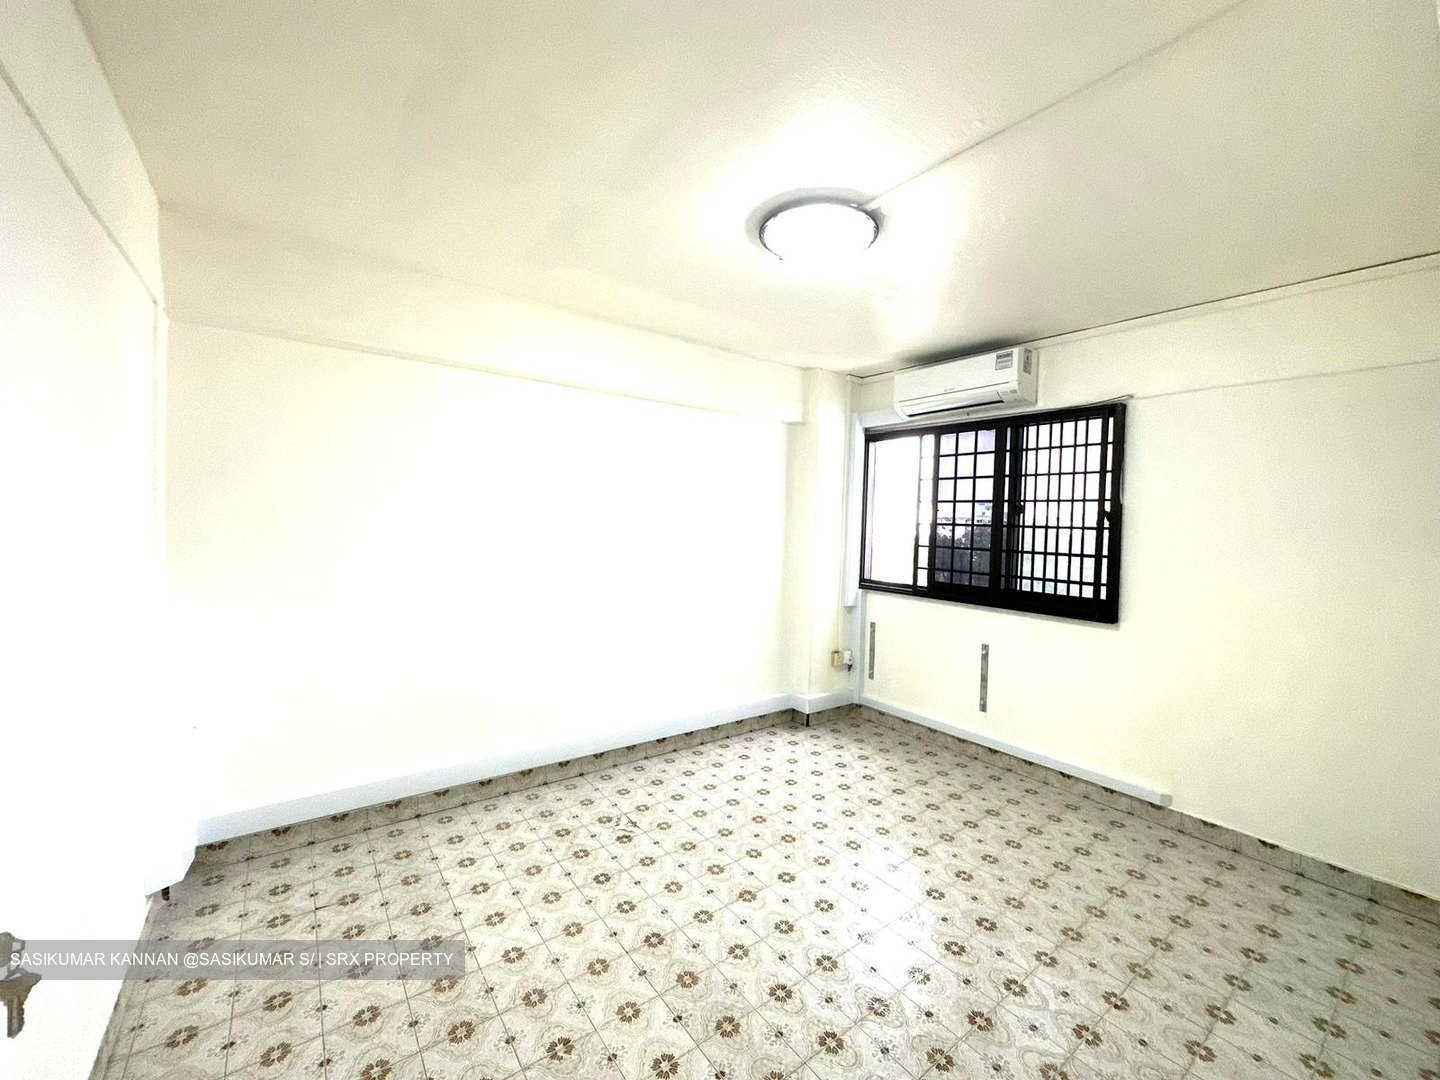 Blk 185 Boon Lay Avenue (Jurong West), HDB 3 Rooms #416558511